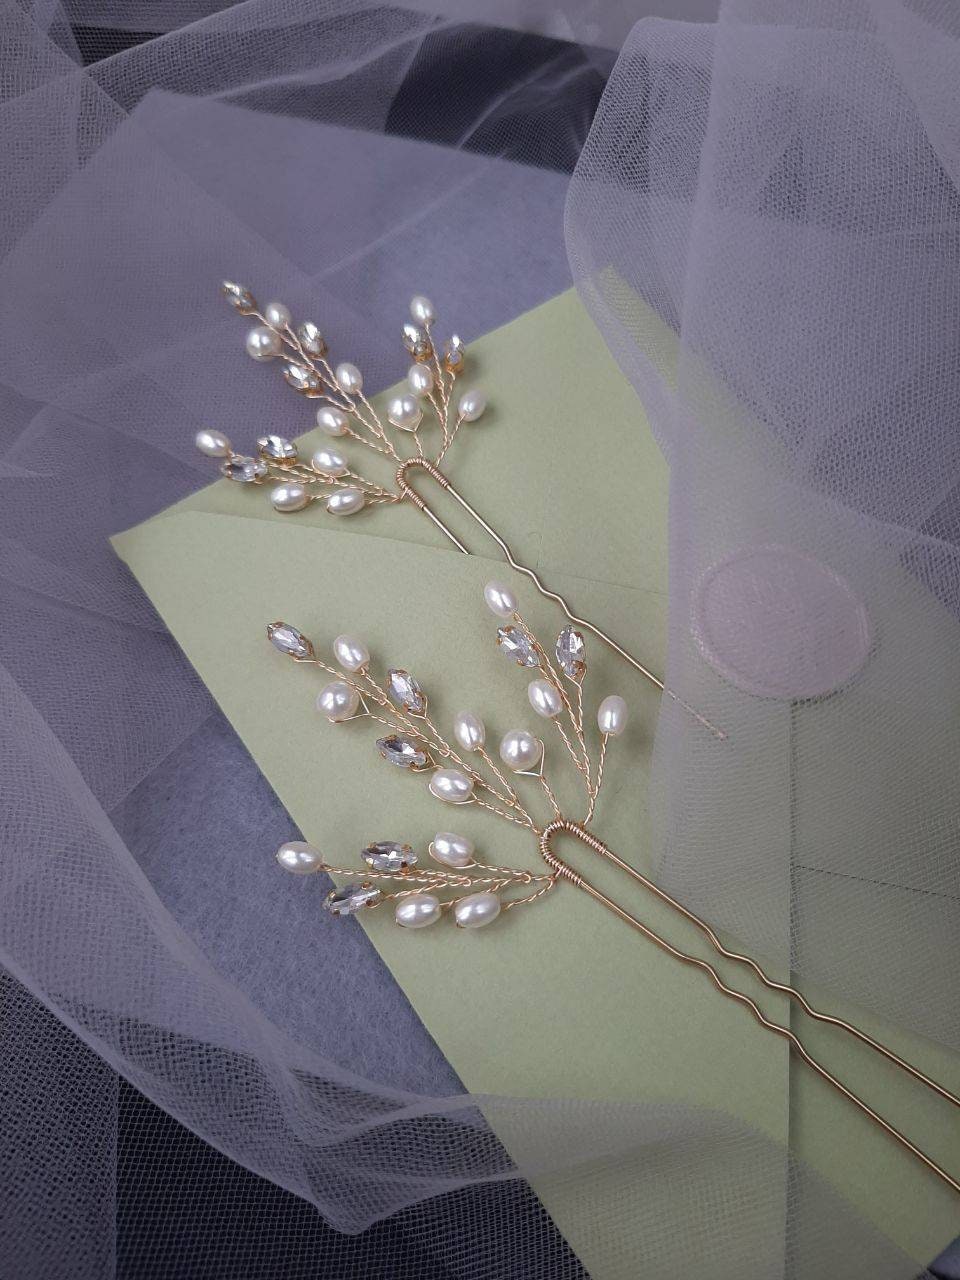 Menkey 36pcs Pearl Hair Pins Bridal Hair Pearls Wedding Preals for Hair Pearl Bobby Pins Pearl Wedding Hair Pins for Women Girl( 6 Sizes), Size: One Size